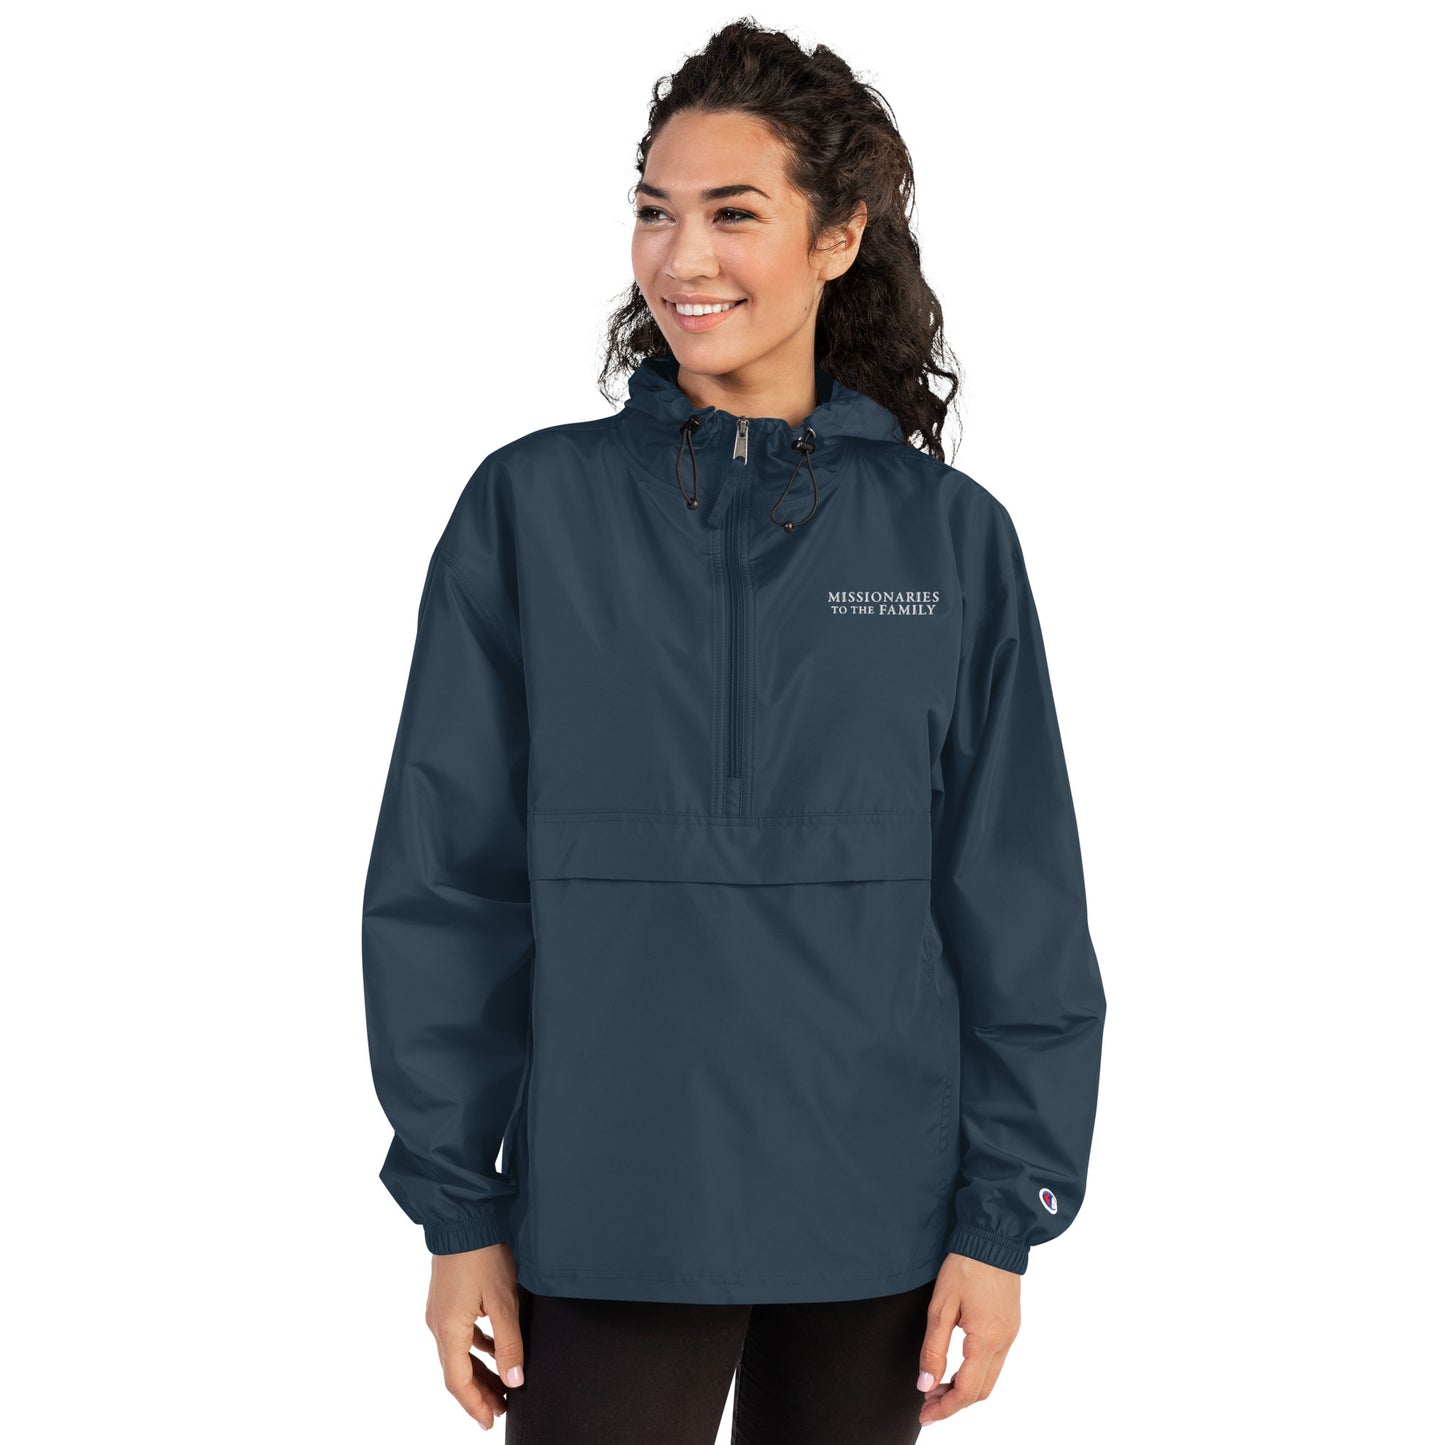 Missionaries to the Family Embroidered Champion Packable Jacket